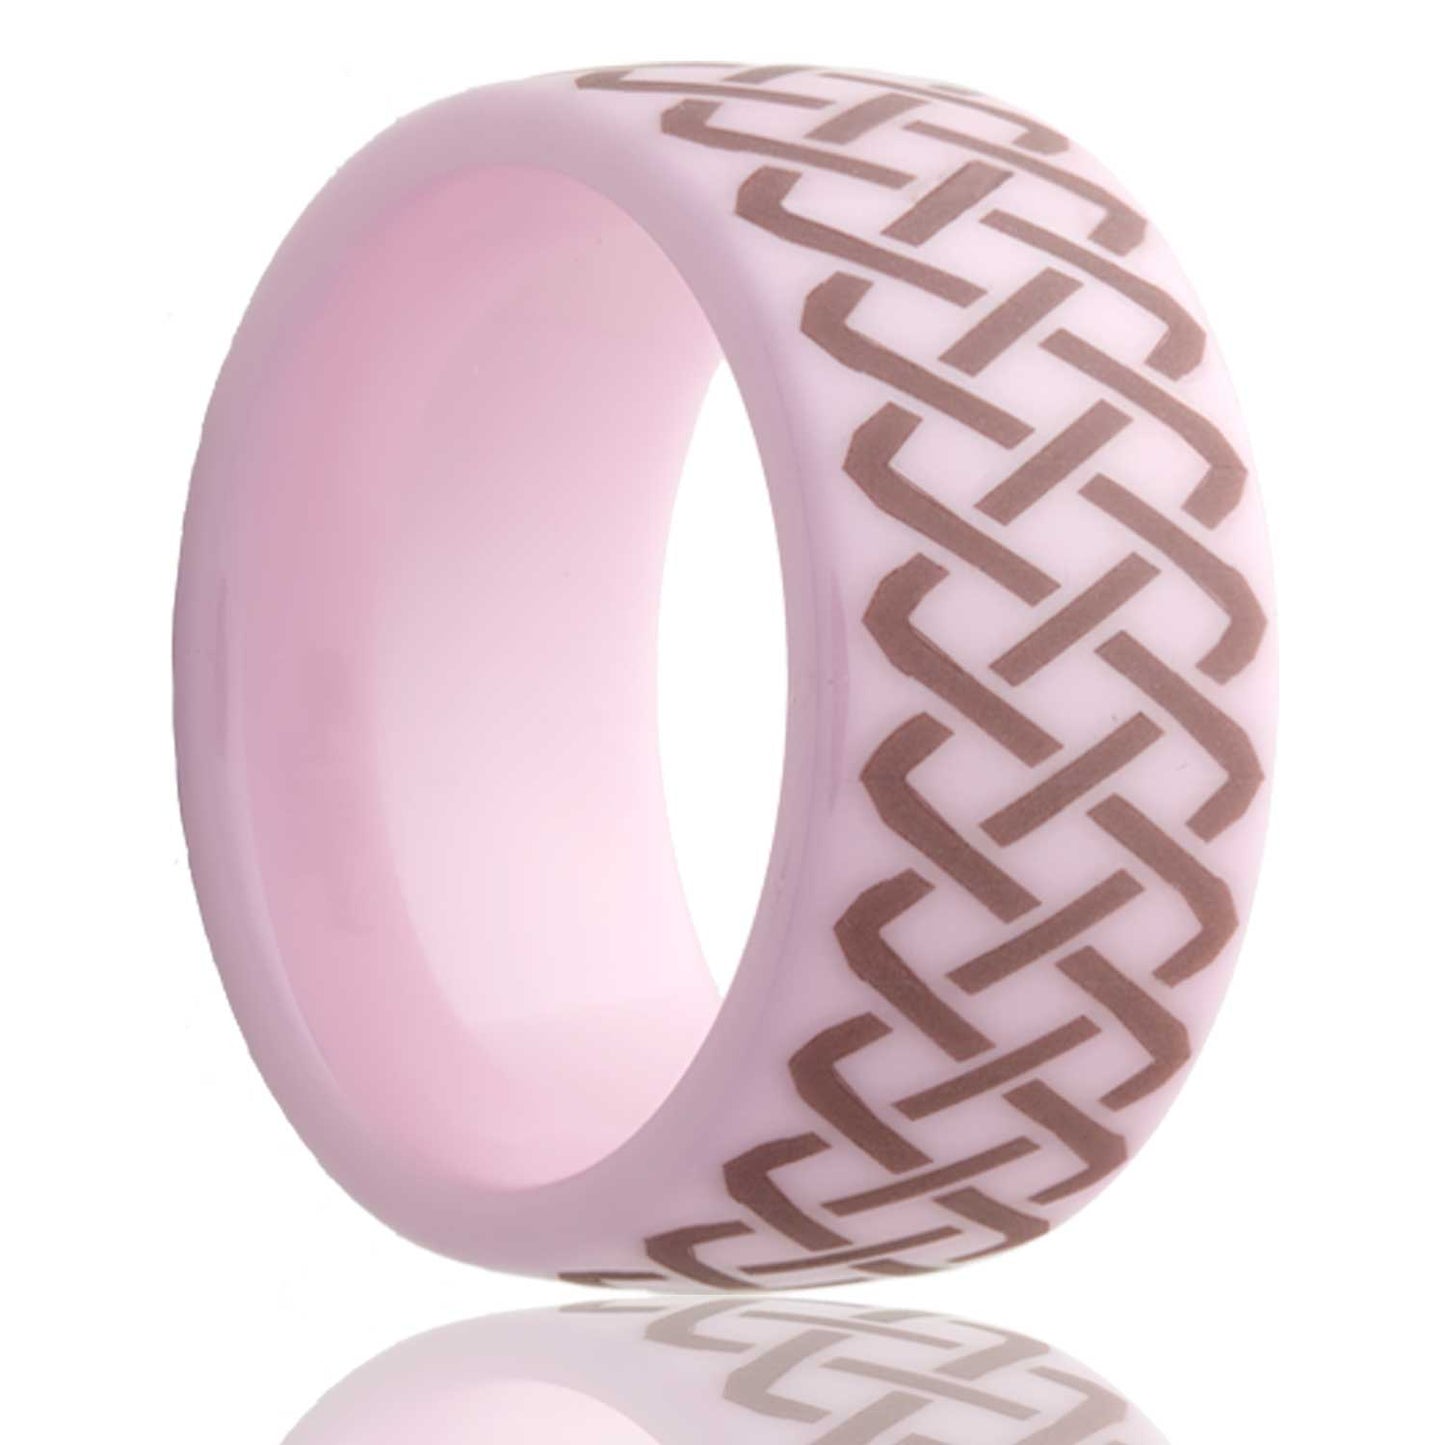 A celtic sailor's knot domed pink ceramic men's wedding band displayed on a neutral white background.